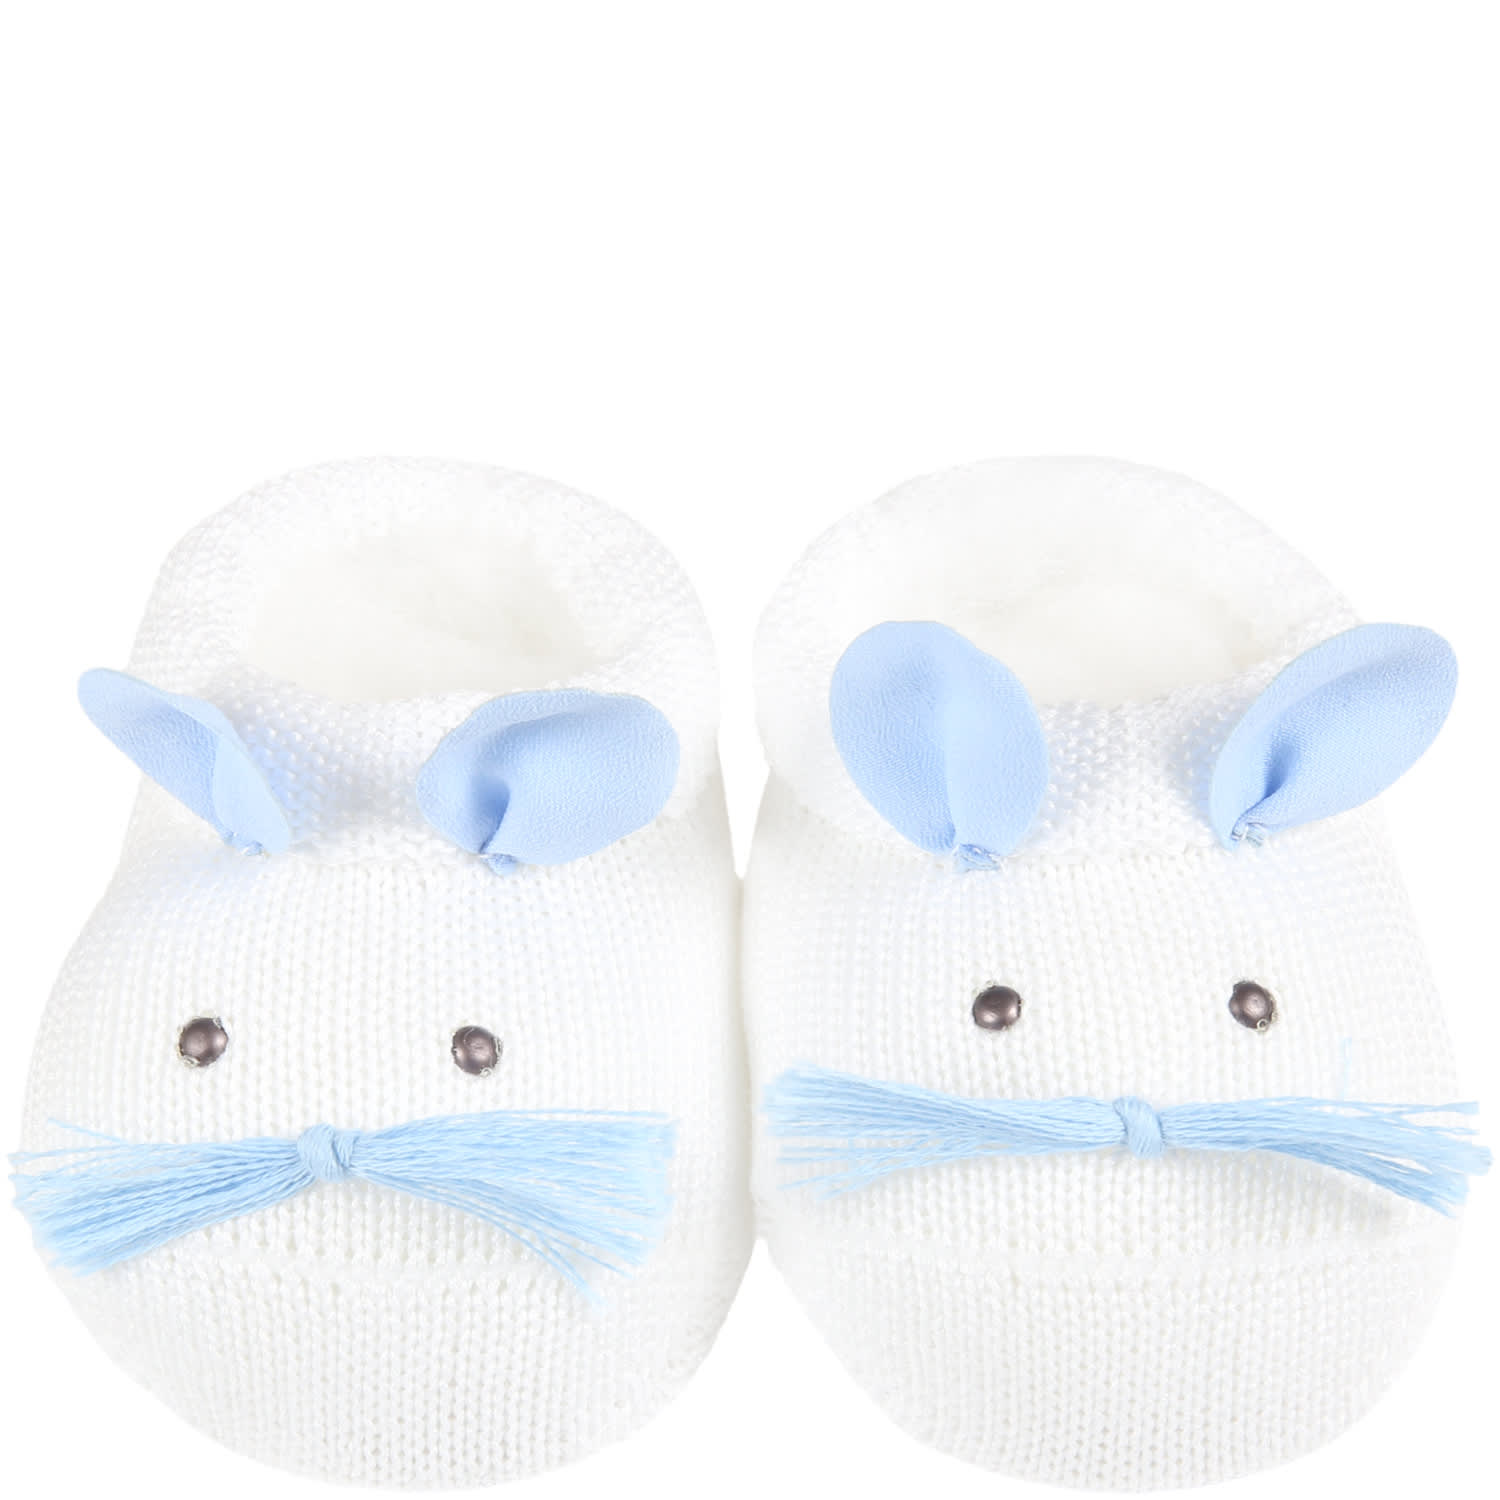 Story Loris White Baby-bootee For Baby Boy - White - unisex - Size: 06 Mo